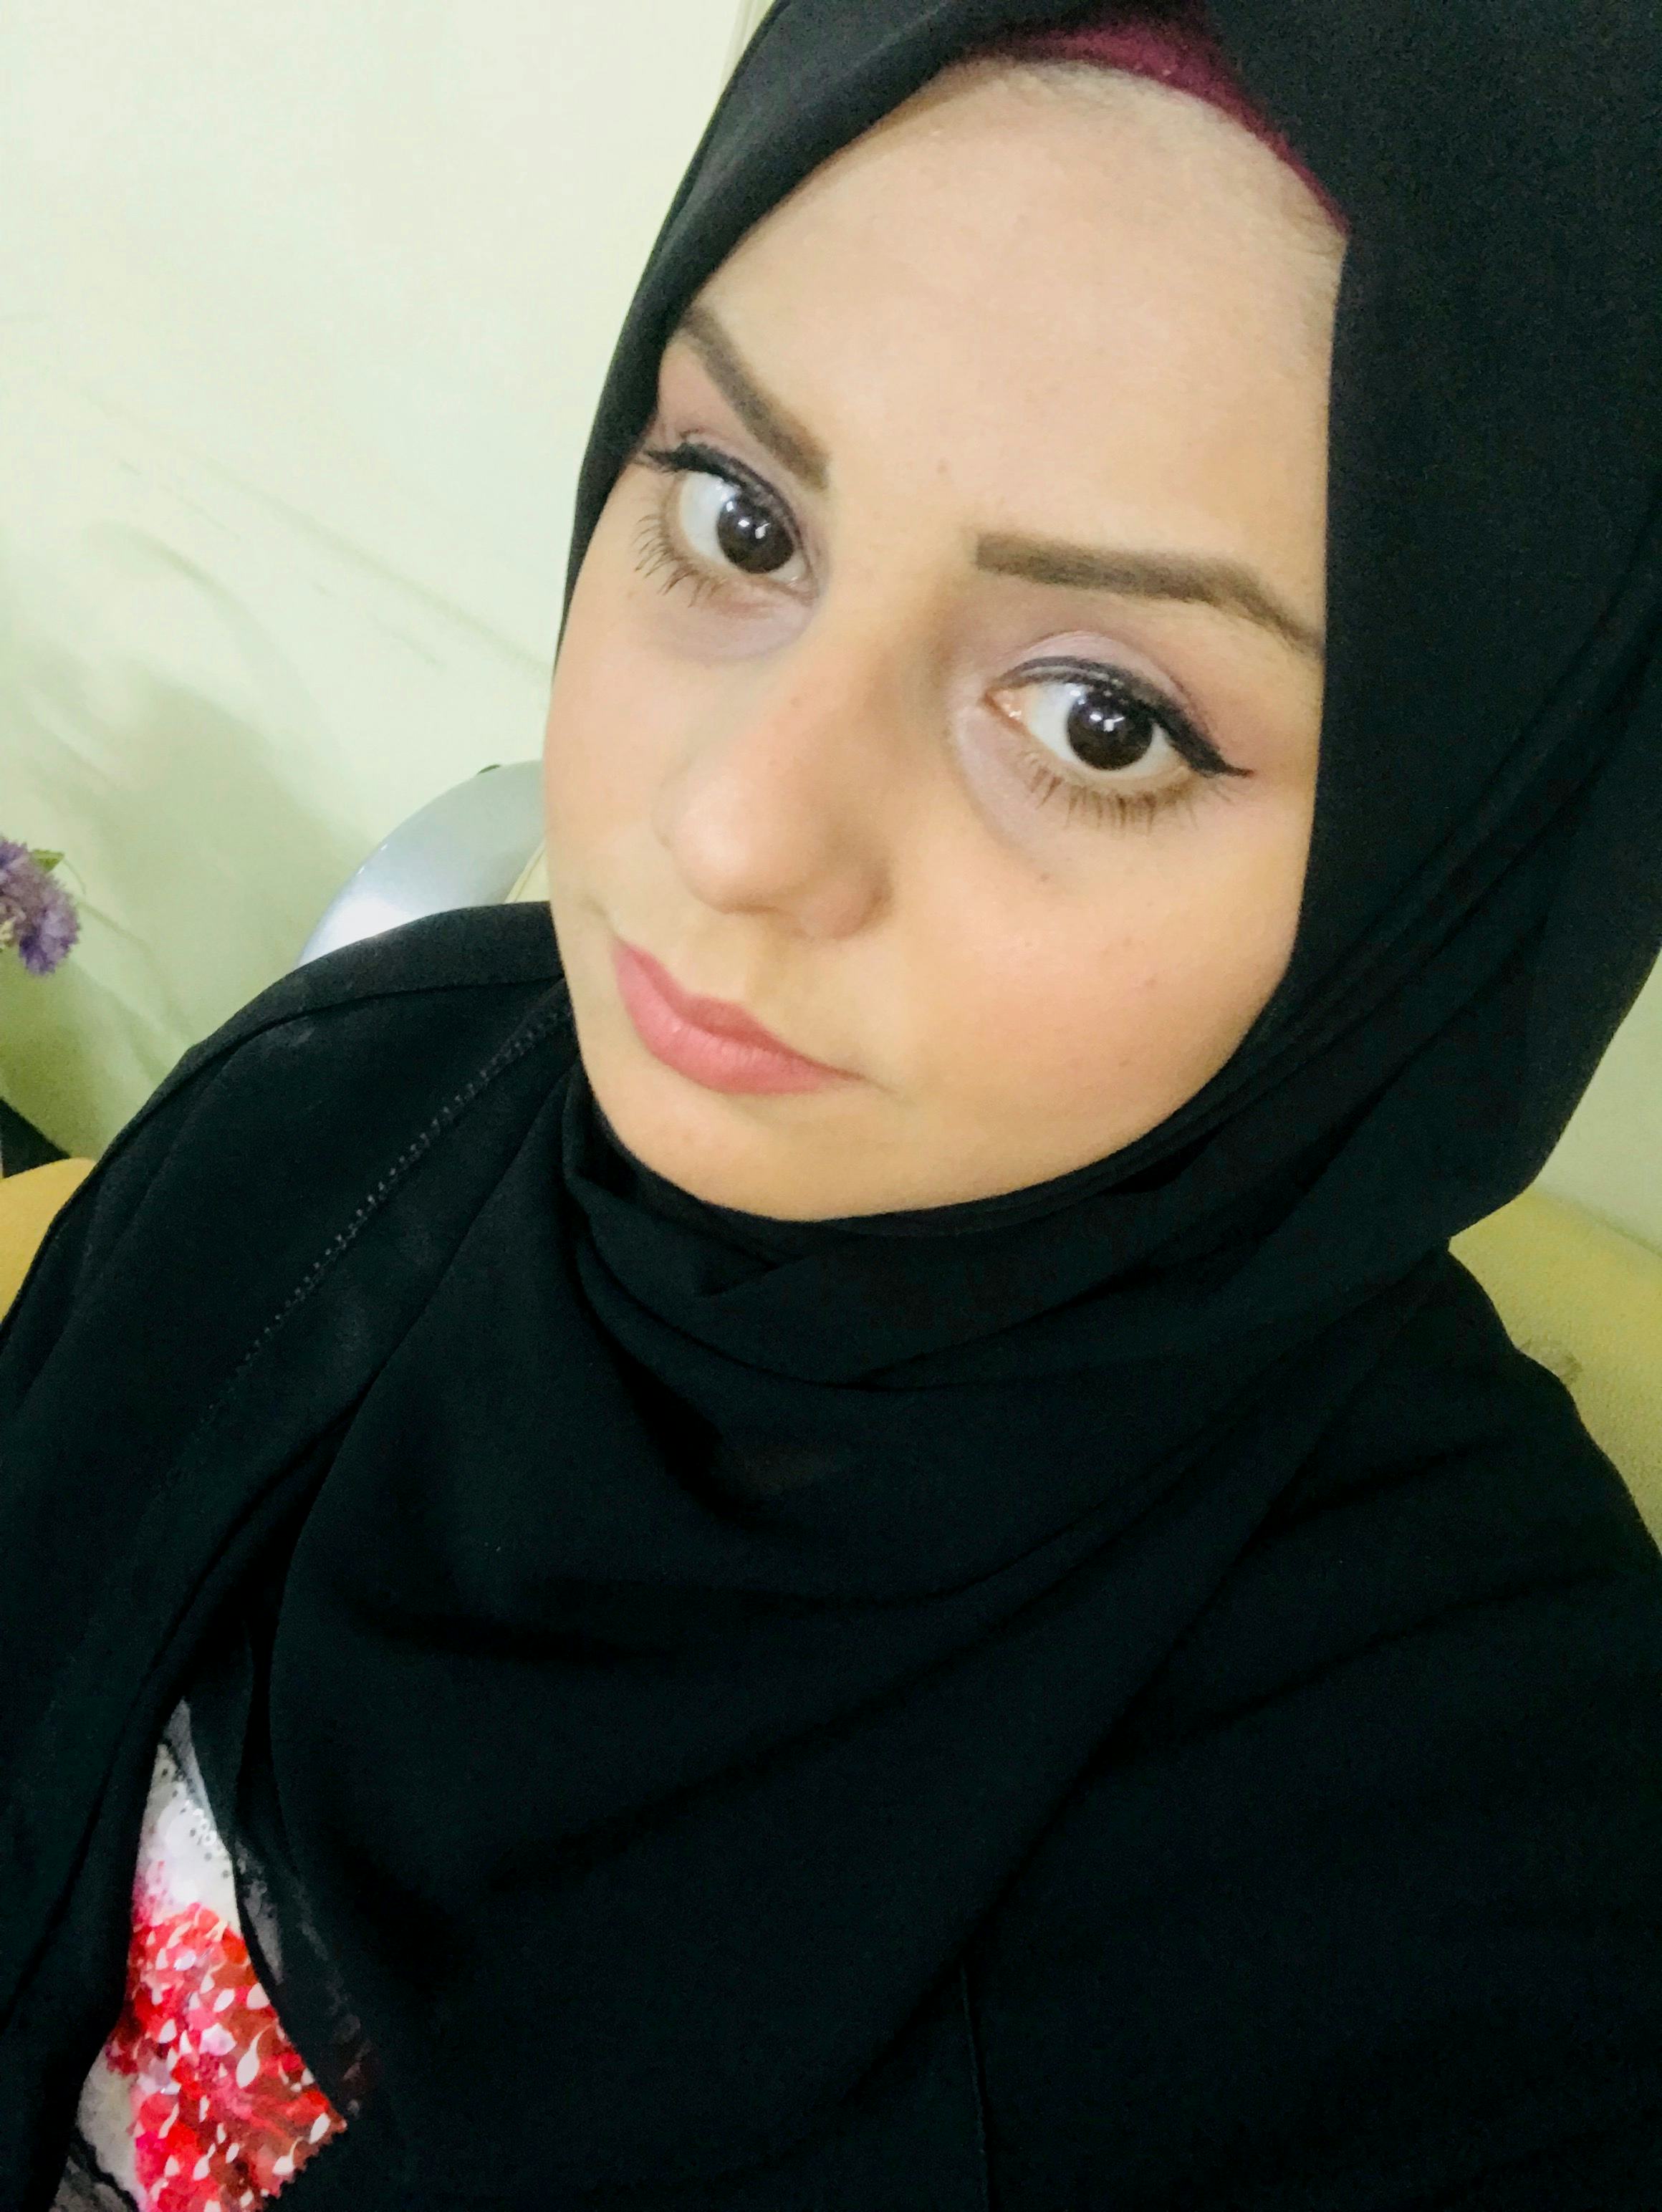 Selfie of a young woman wearing a hijab